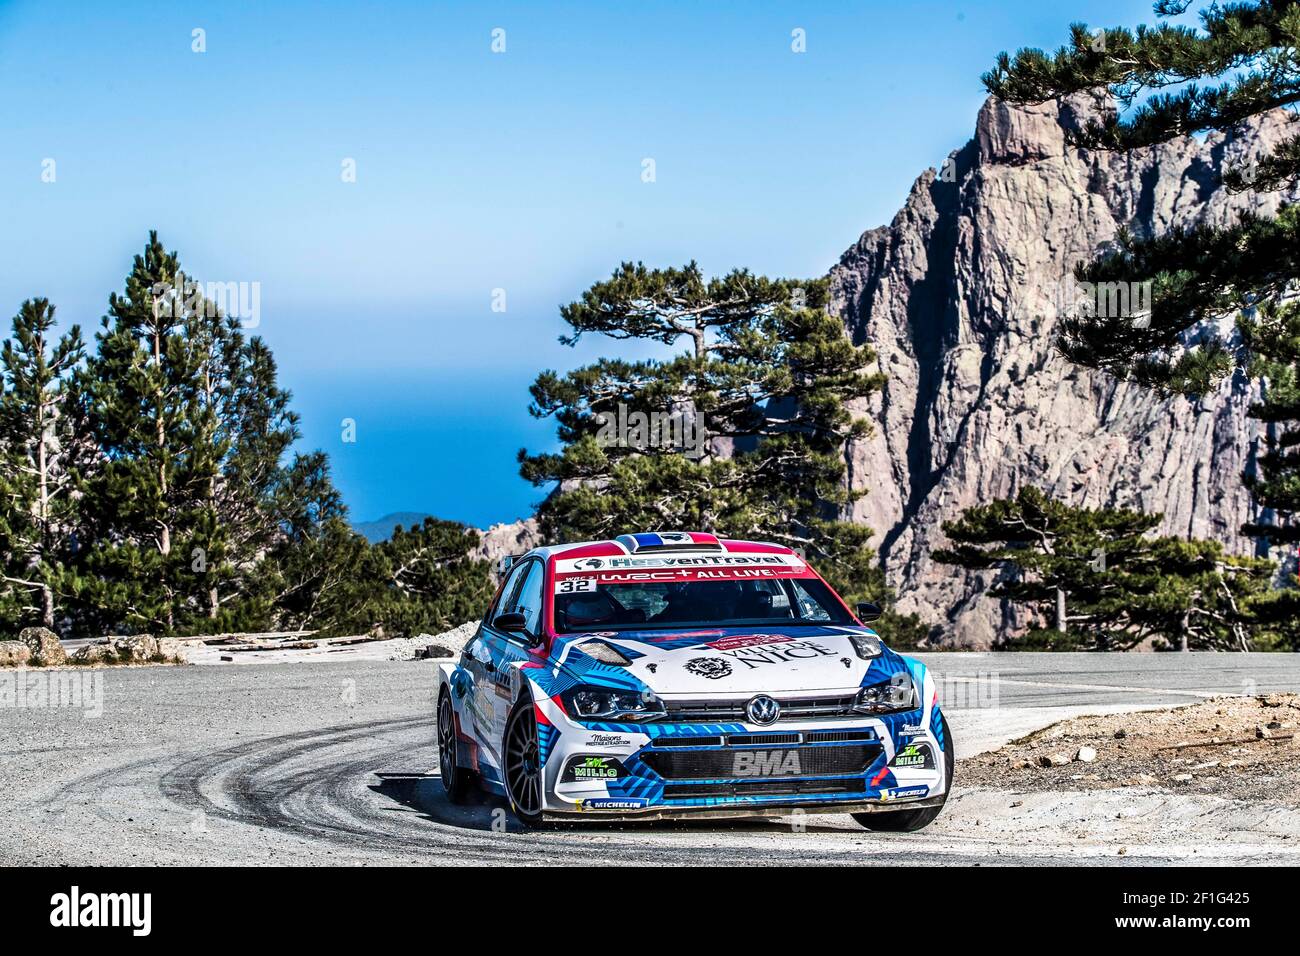 32 CAMILLI ERIC (FRA), BURESI FRANCOIS‐XAVIER (FRA), VOLKSWAGEN POLO GTI,  action during the 2019 WRC World Rally Car Championship, Tour de Corse rally  from march 28 to 31 at Bastia, France -